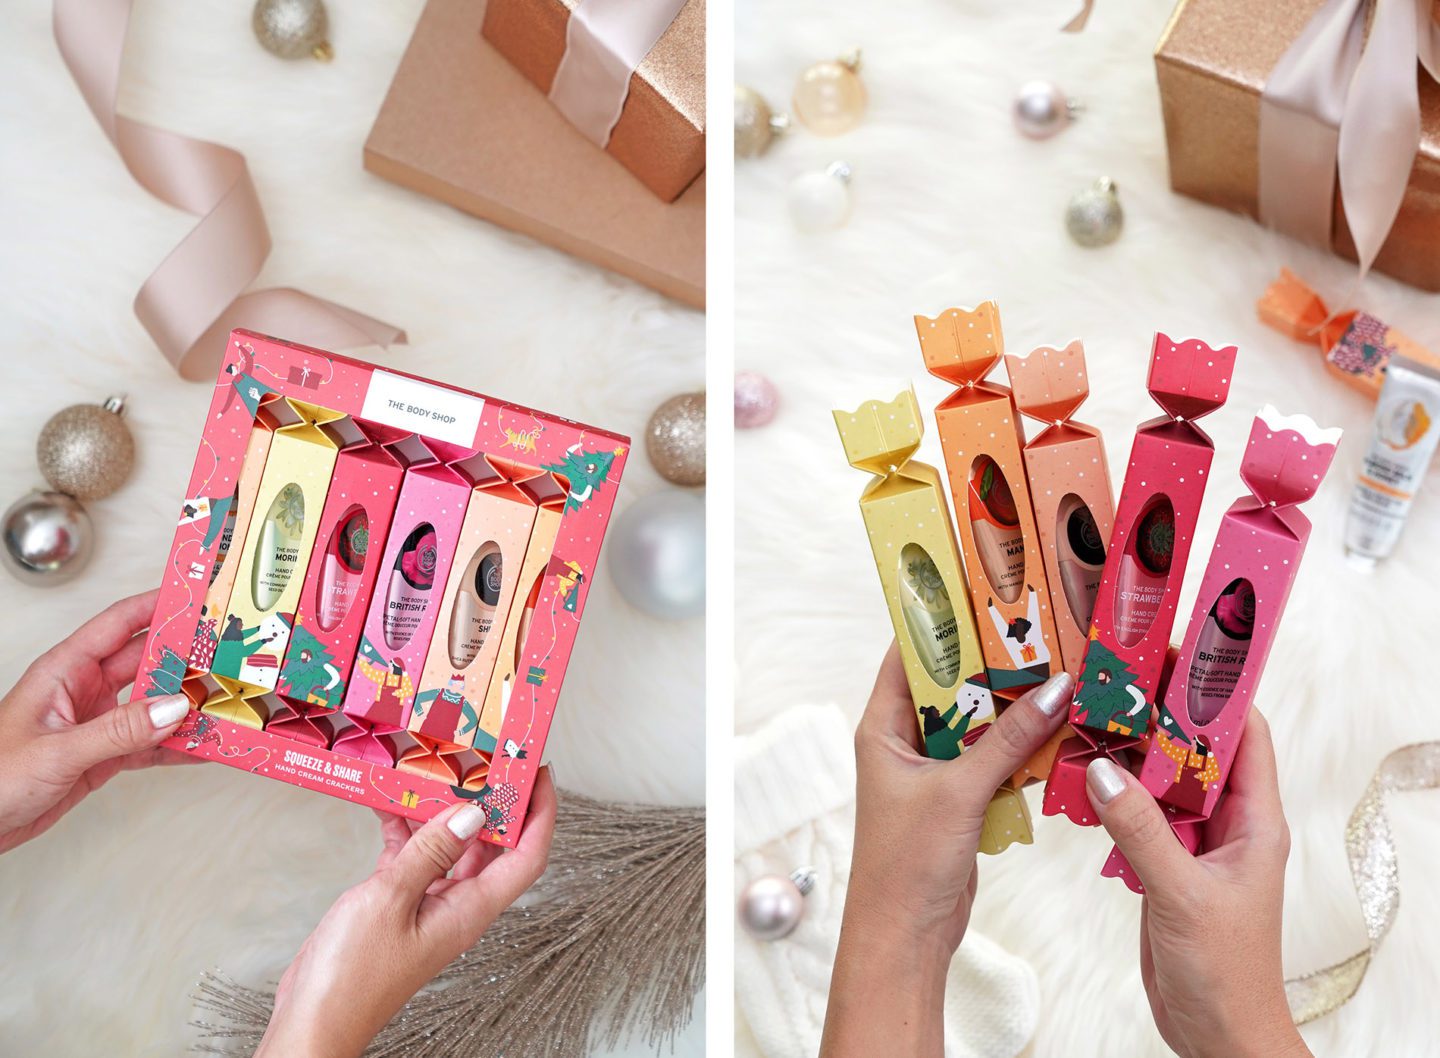 The Body Shop Squeeze and Share Hand Cream Cracker Set